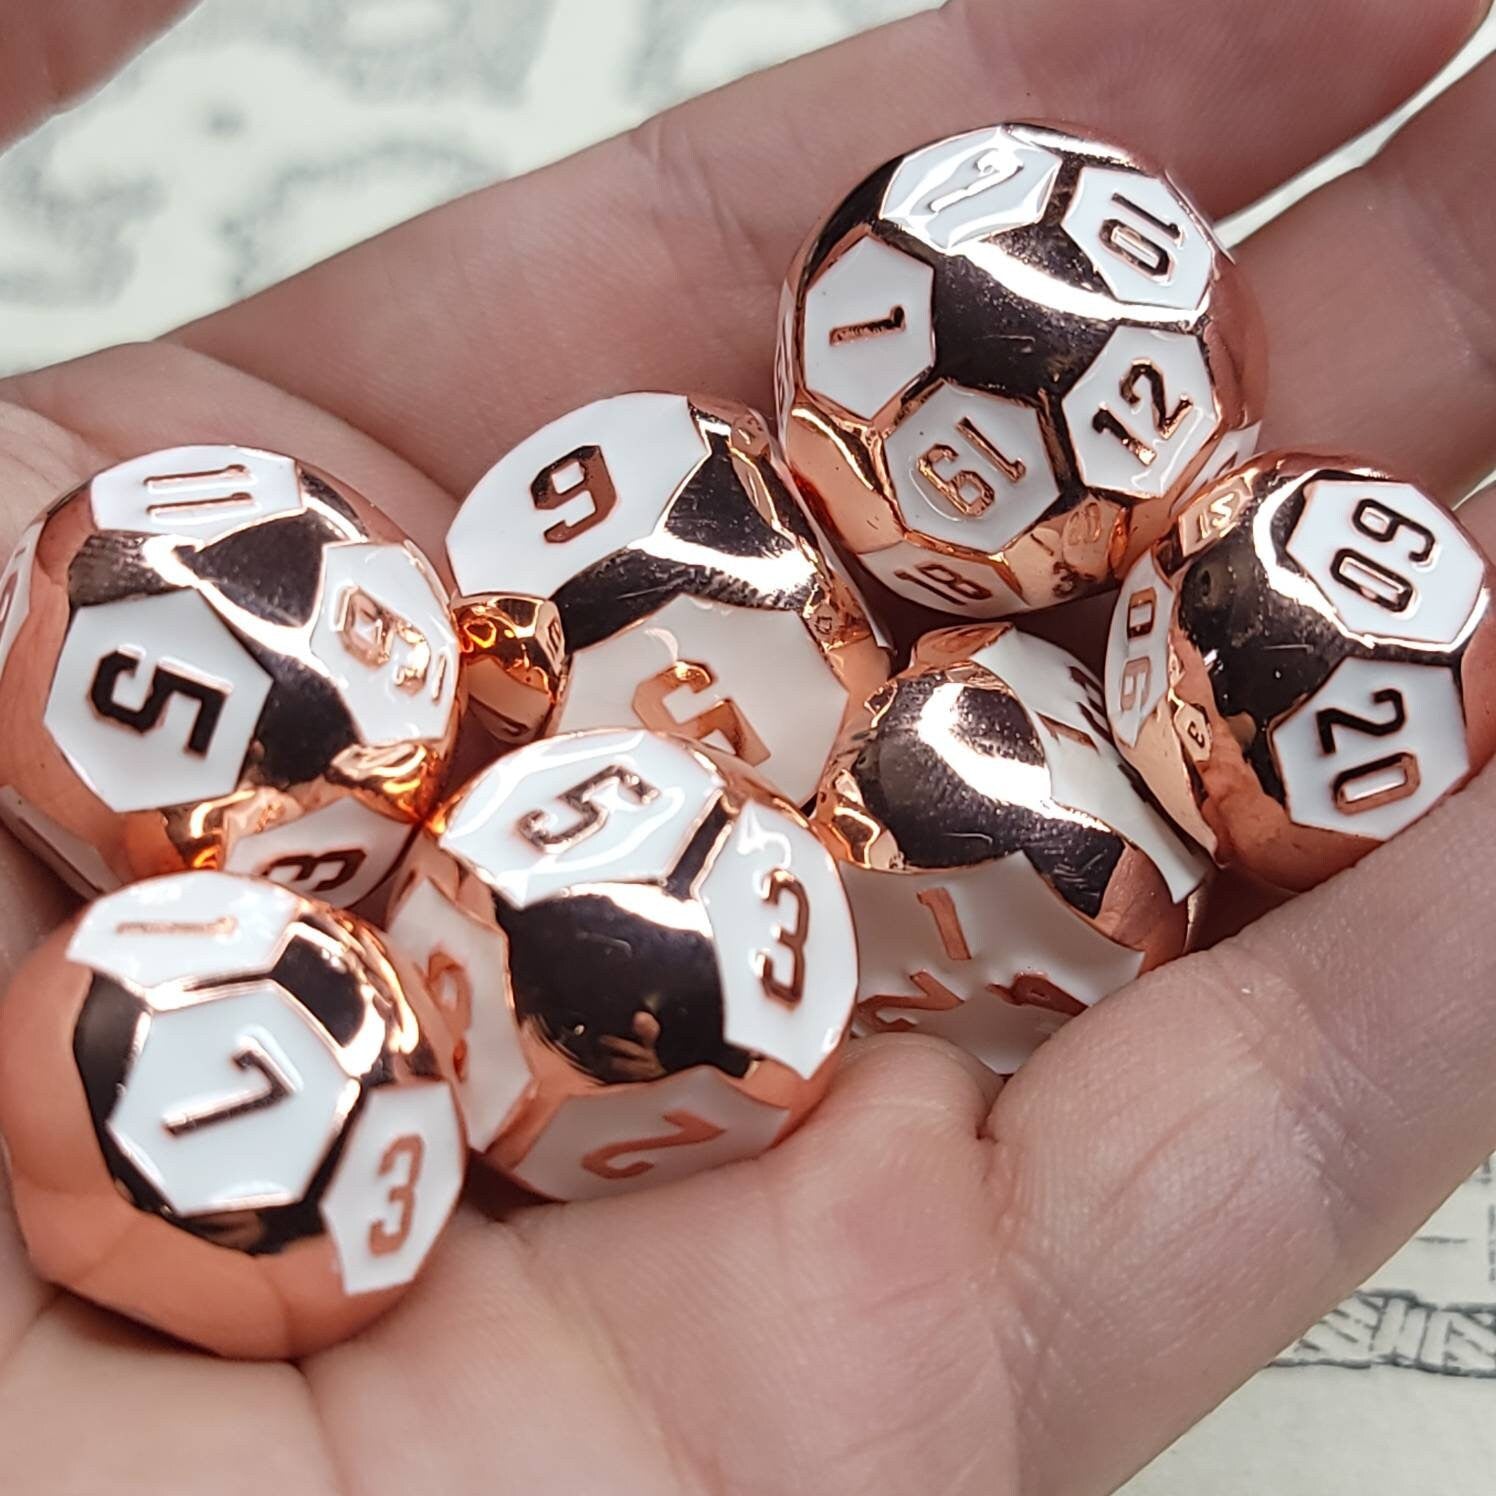 Orbs of Righteousness Metal Dice Set| RPG Dice | Polyhedral Dice Set | Dungeons & Dragons | DnD Dice Set | Metal Dice Set